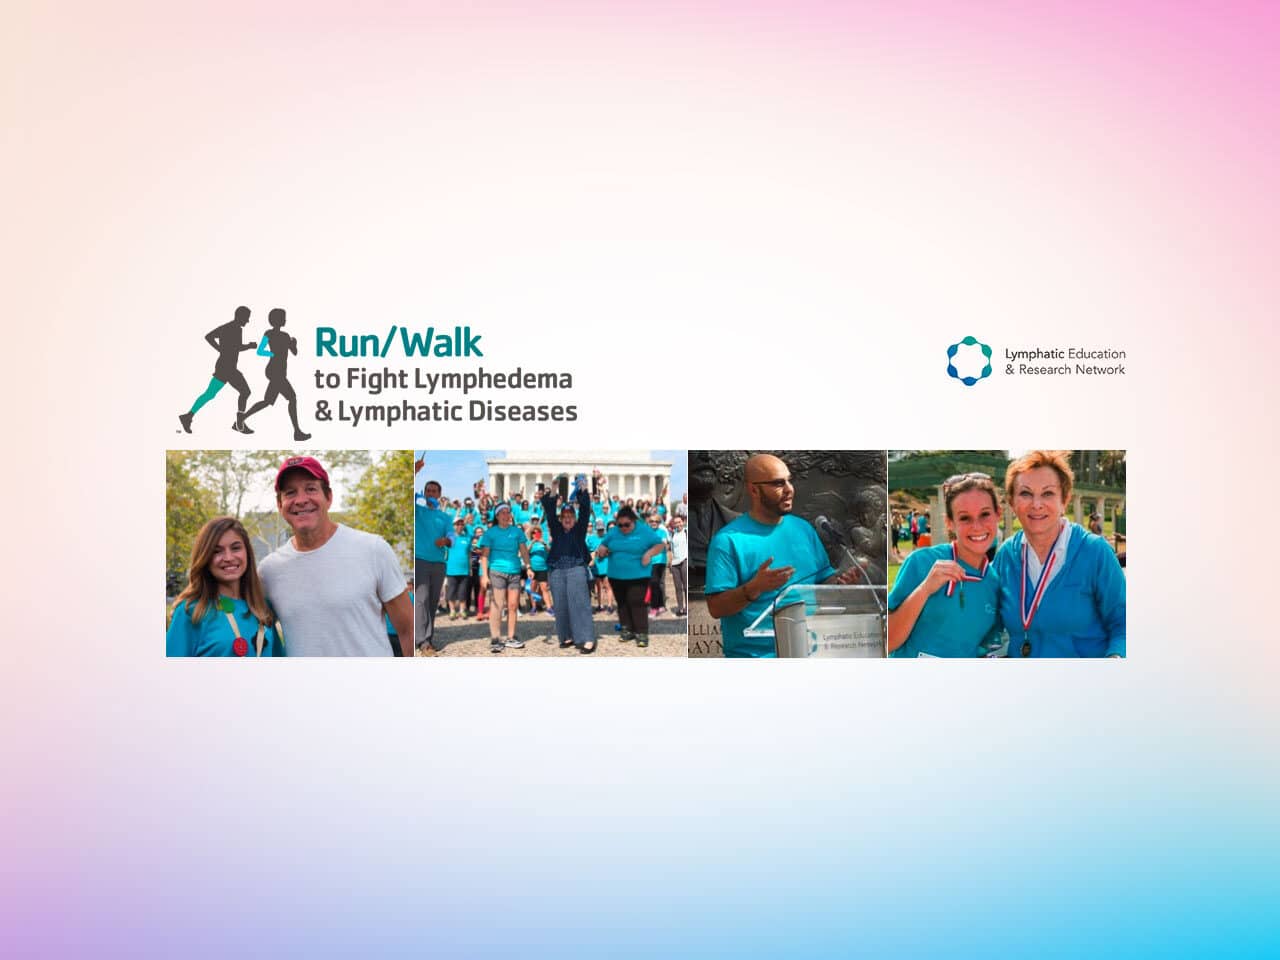 AIROS Medical to Sponsor Lymphatic Education & Research Network’s 2020 Walk Series